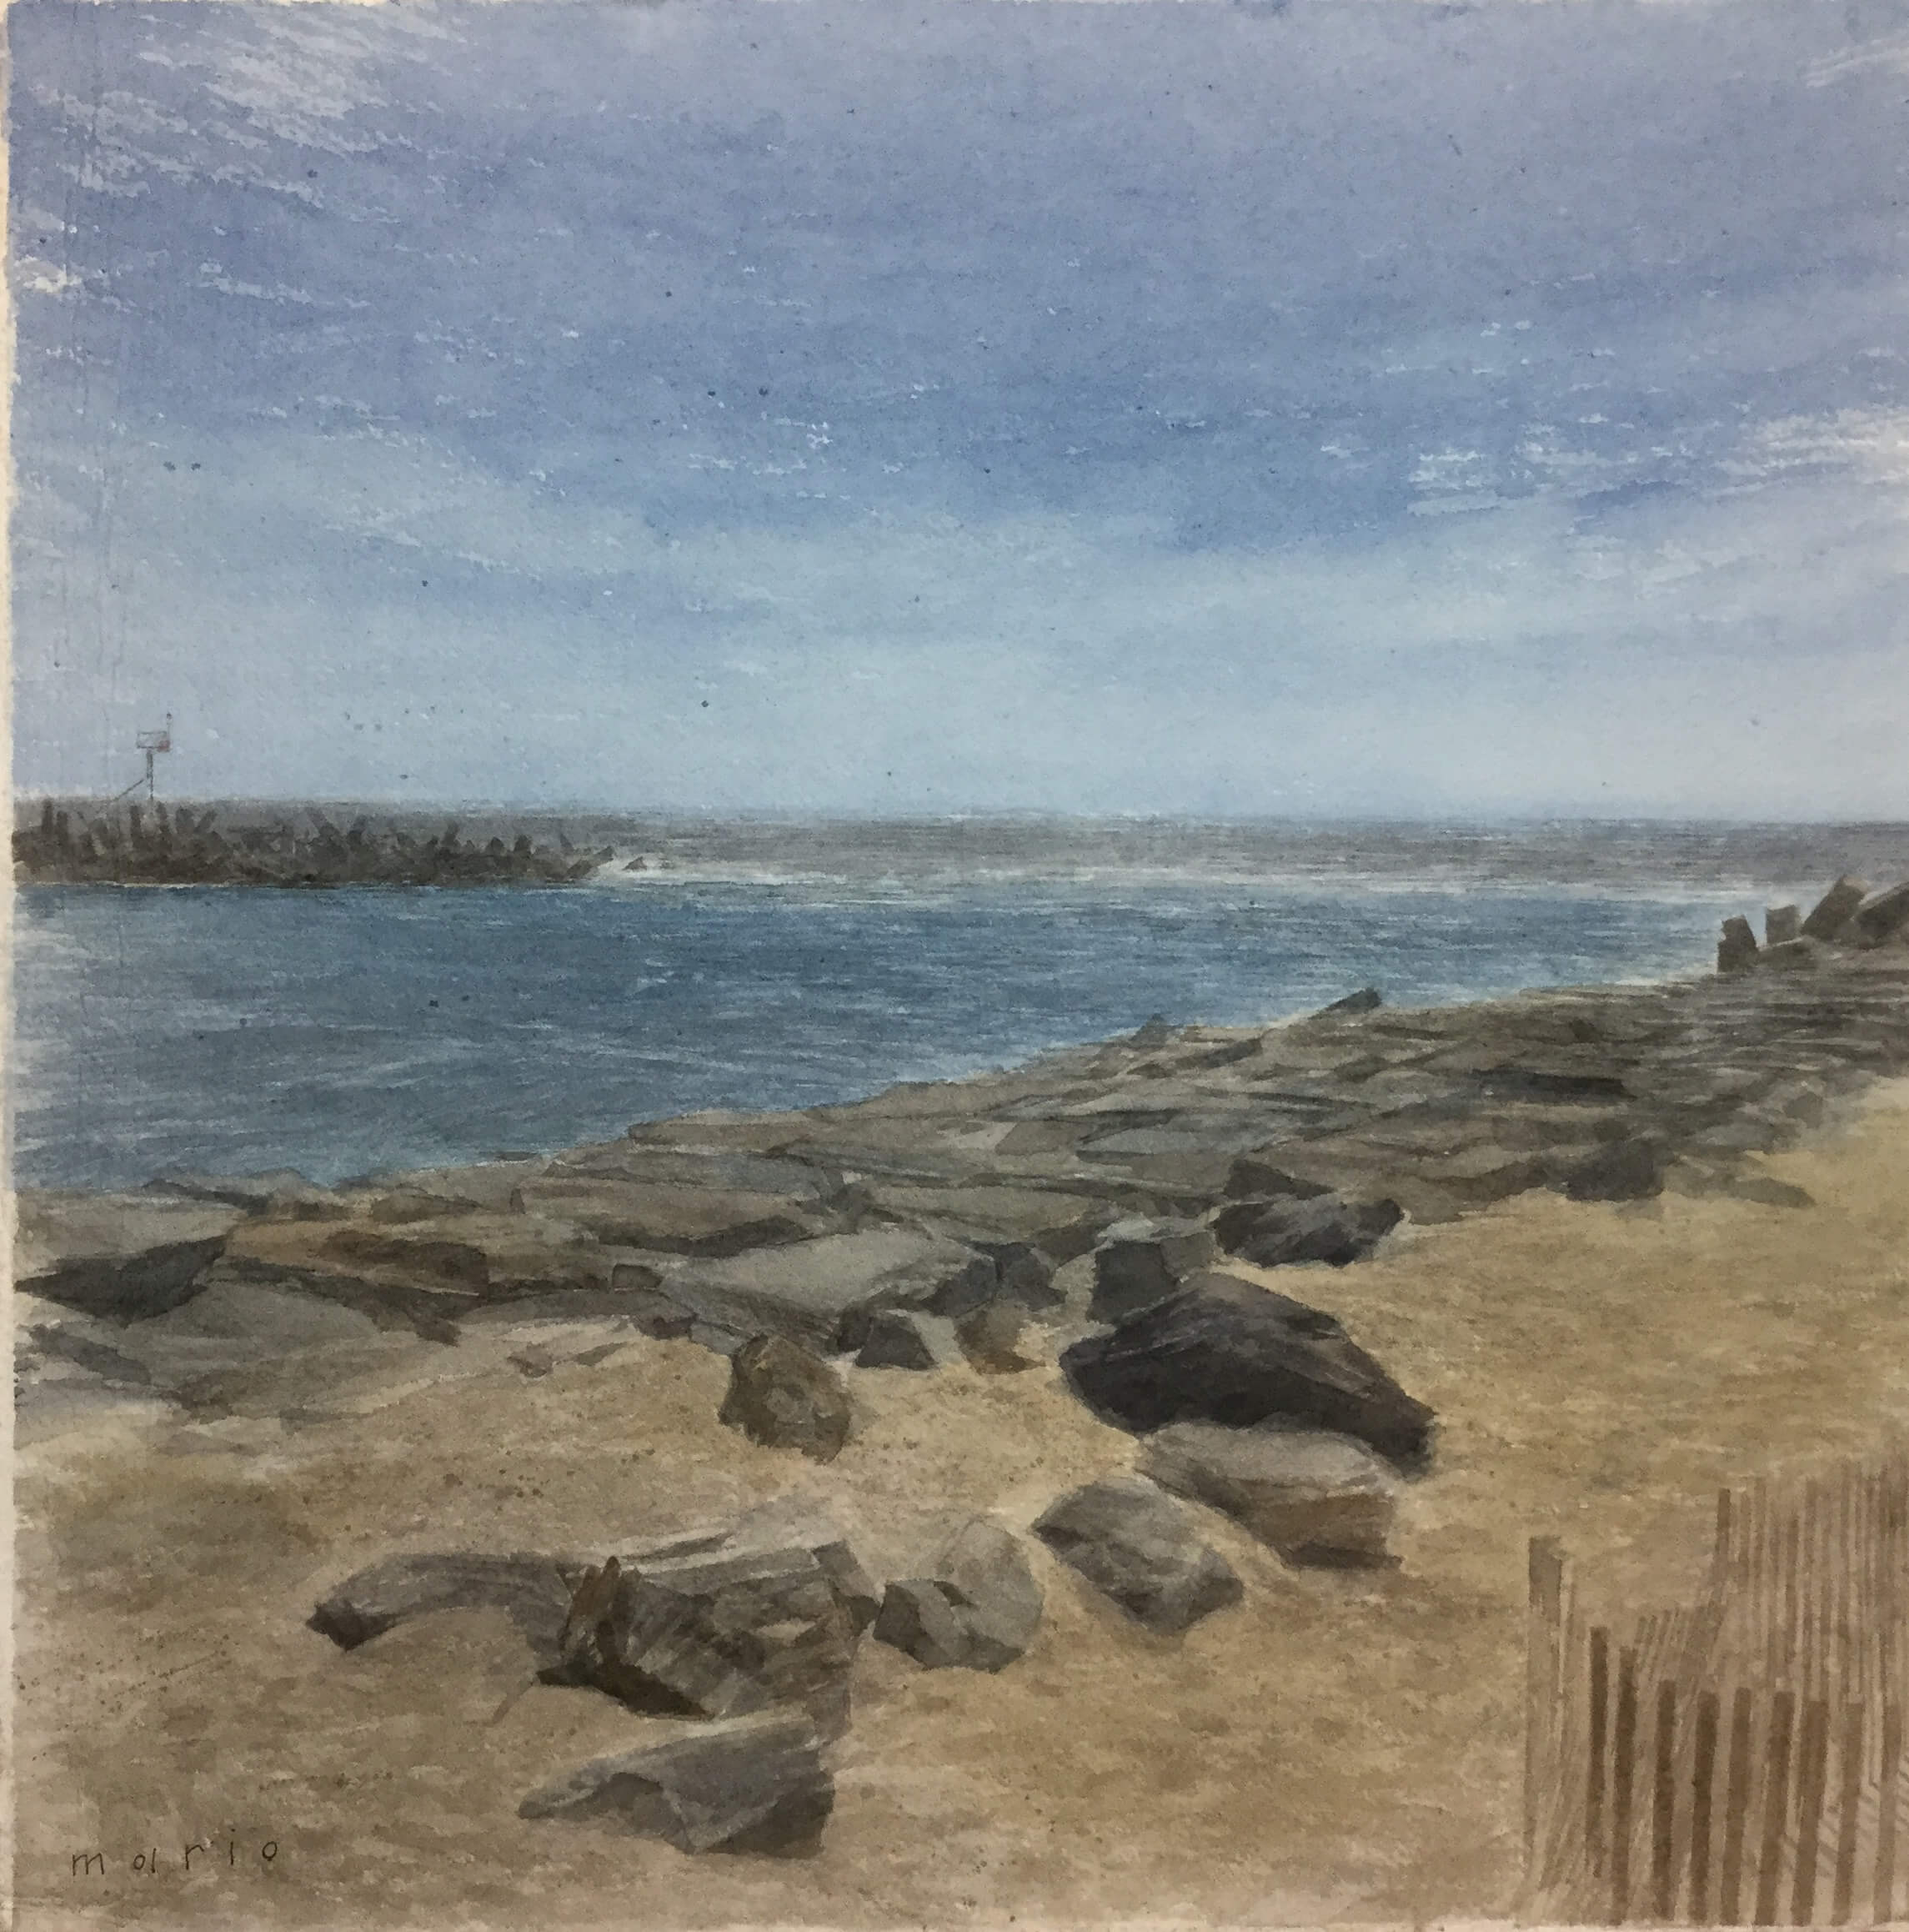 Painting of the shoreline with sand, rocks and sea by artist and tutor Mario Andres Robinson.